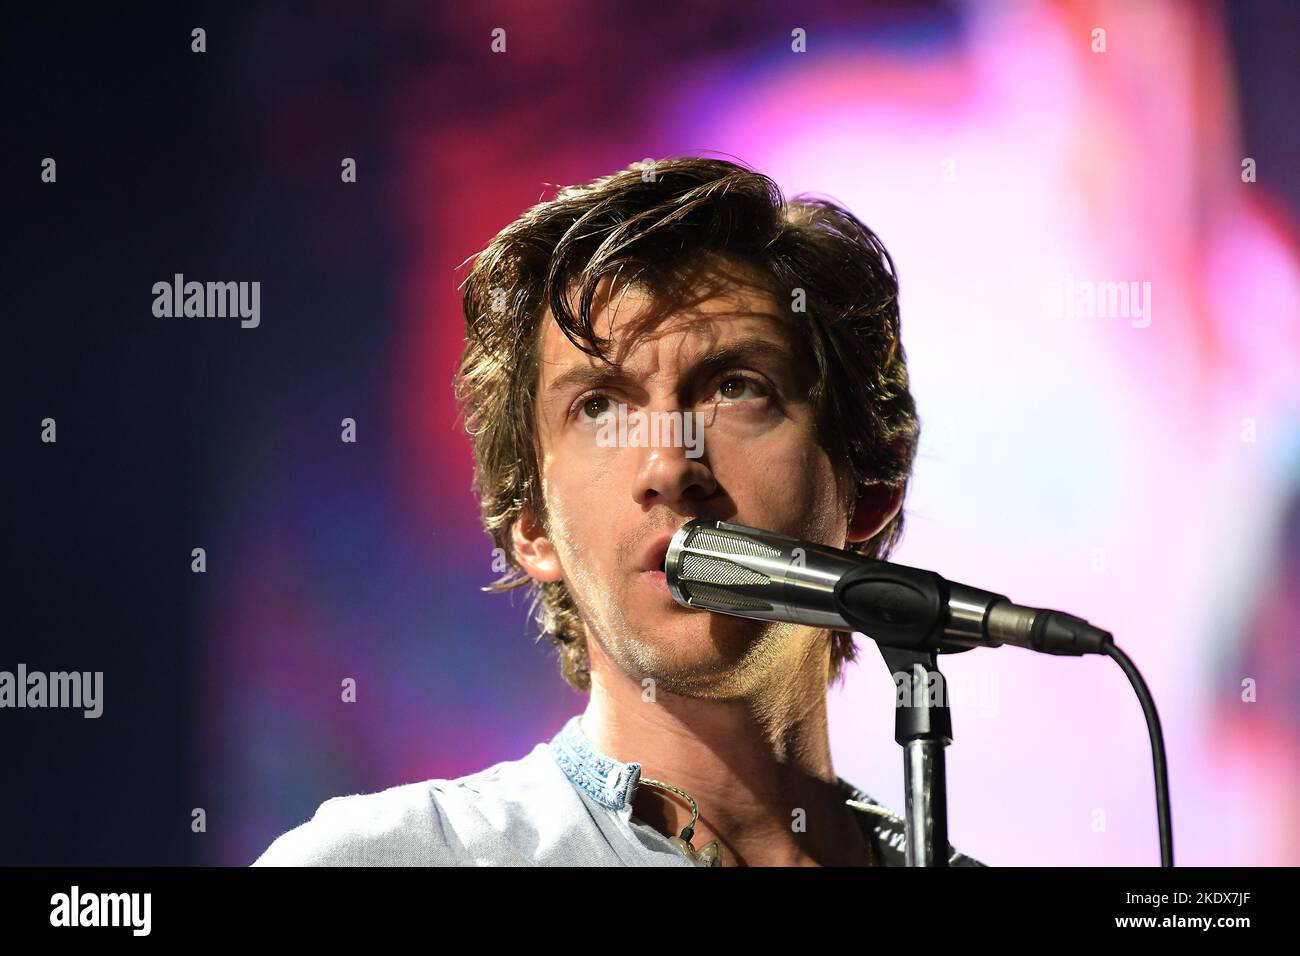 Rio de Janeiro,Brazil,November 4, 2022.Musician and vocalist Alex Turner of the indie rock band Artic Monkeys, during a concert at the Jeunesse Arena Stock Photo